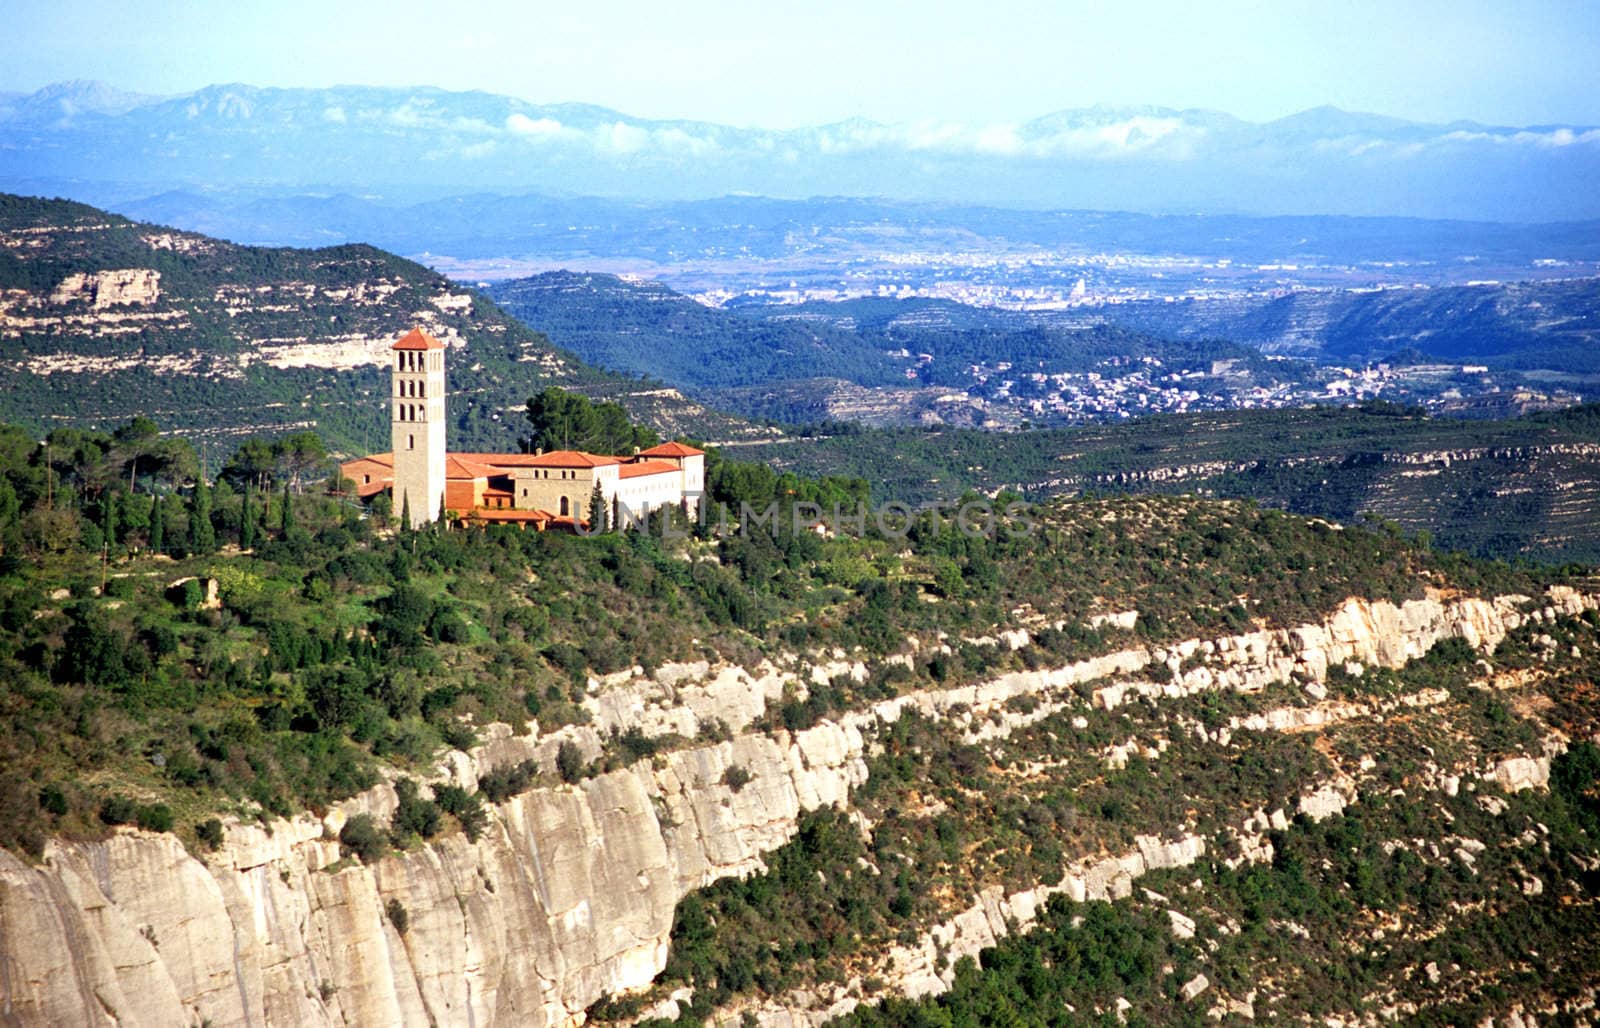 A monastery in the mountains of Catalonia, Spain has an inspirational view of the coutryside.